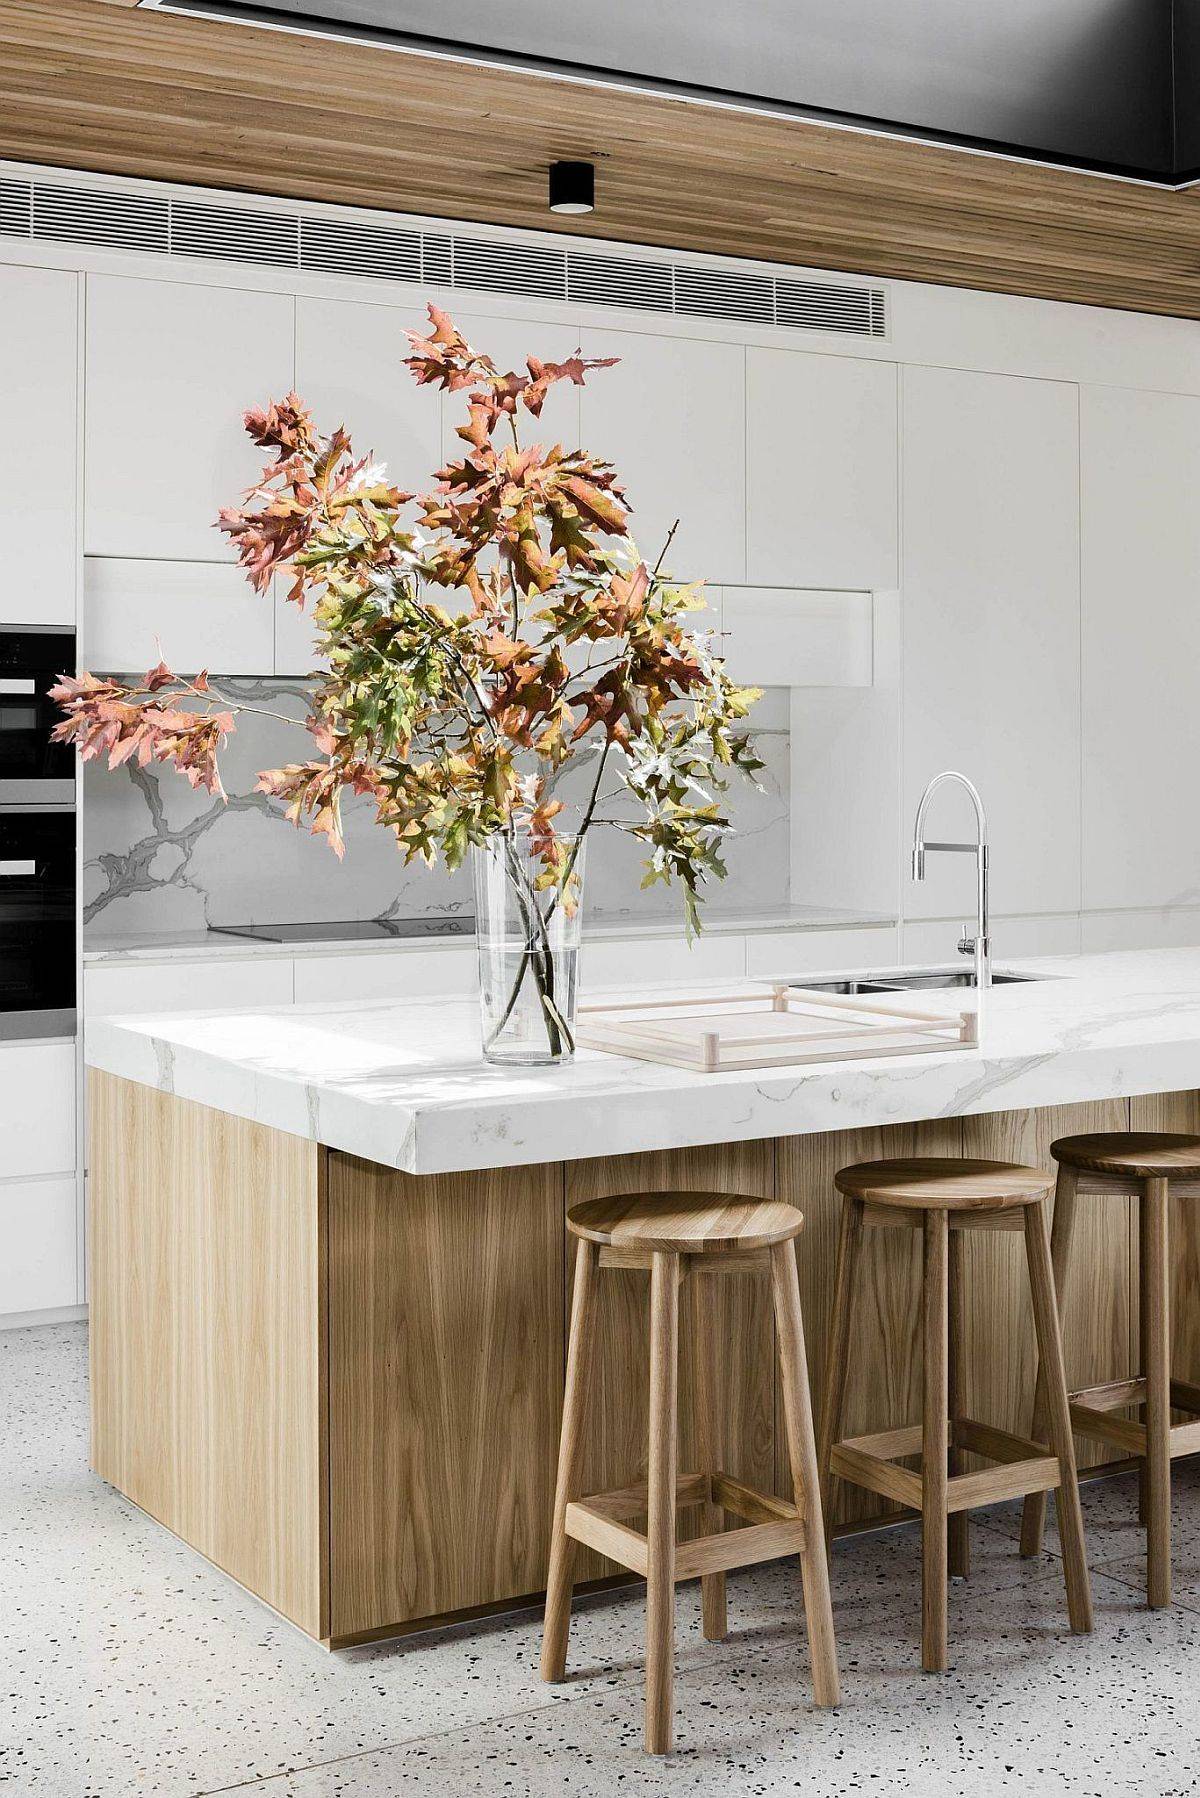 Marble brings a touch of class and sophistication to the wood and white kitchen